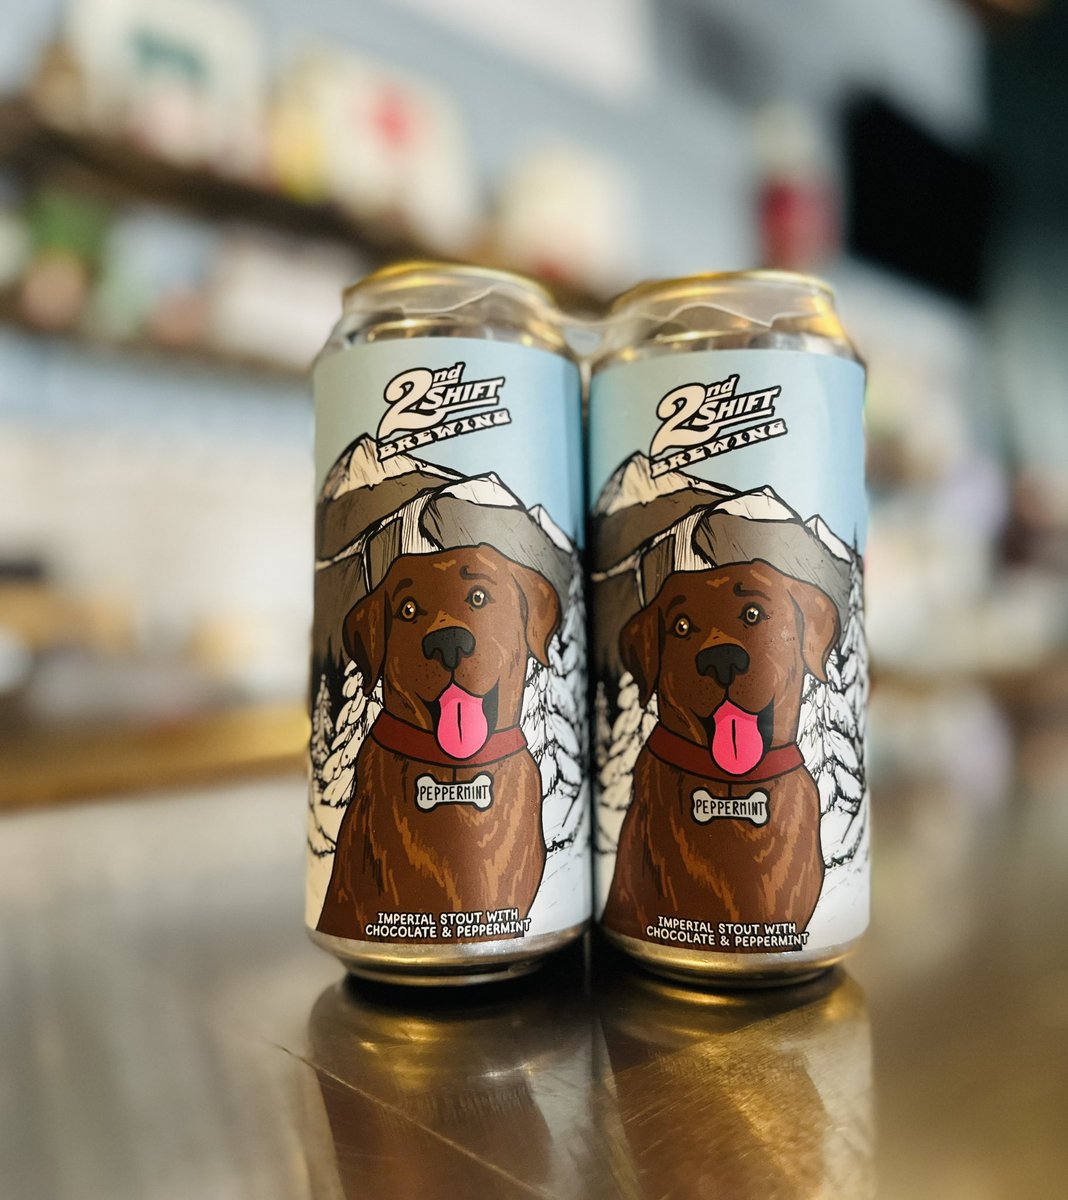 🚨New Stout Release🚨 Peppermint-Imperial Stout w/ Chocolate & Peppermint This beer is strong, sweet & ever the coolest, Peppermint is an homage to one of the best dogs that ever was. Using a new base stout, this beer has rich semi-sweet chocolate notes with just the right